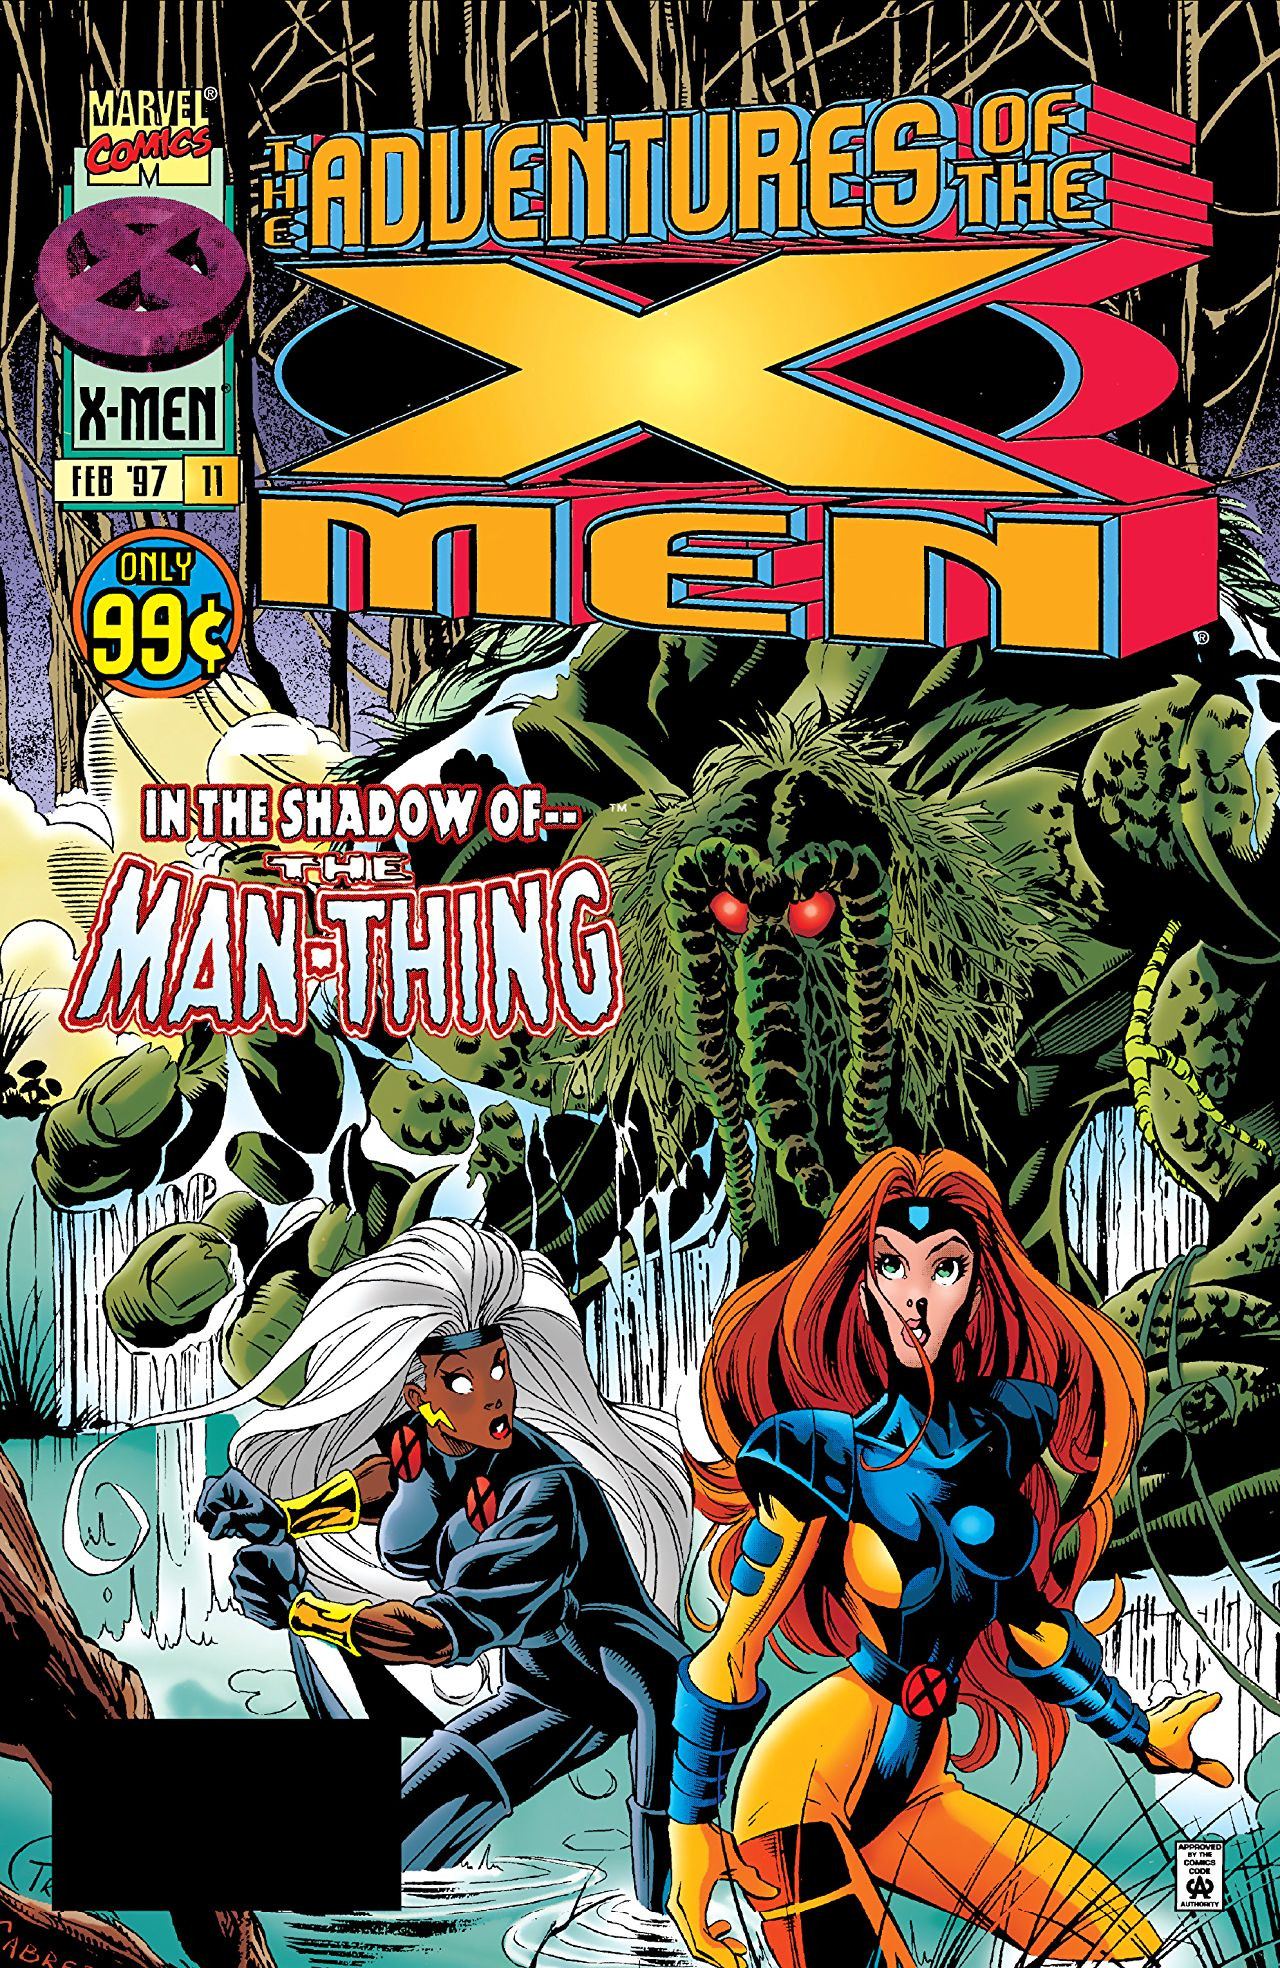 Image result for adventures of the x-men #11 and #12